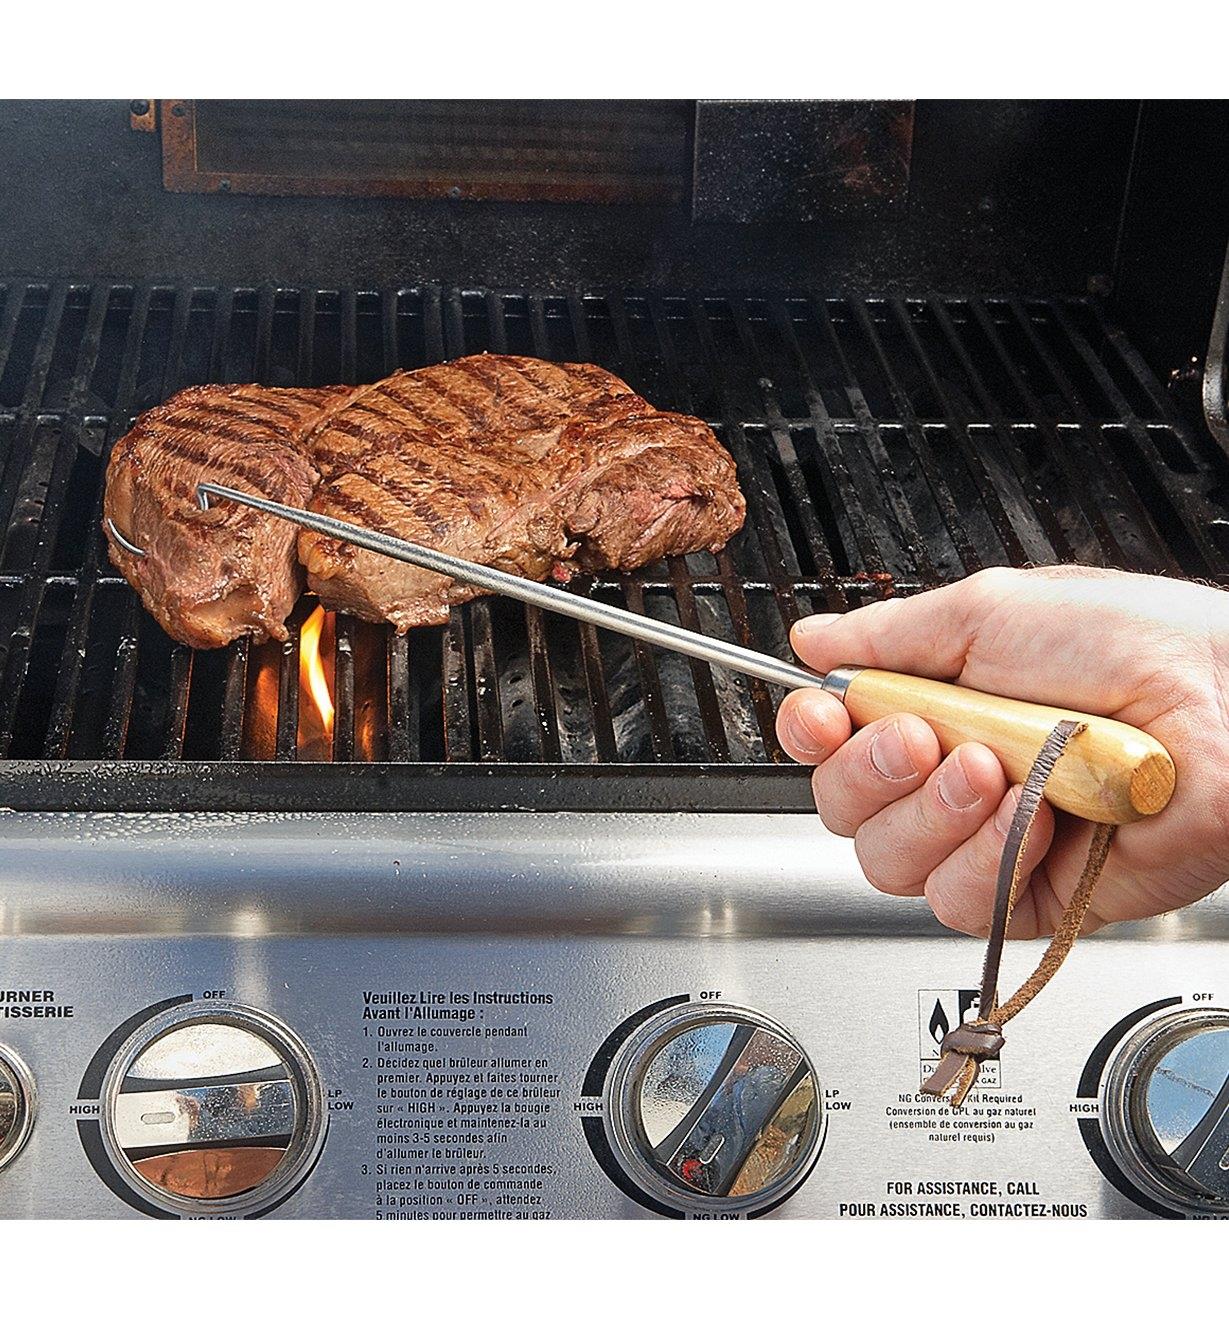 Turning a steak on a barbecue using a Pigtail Flipper